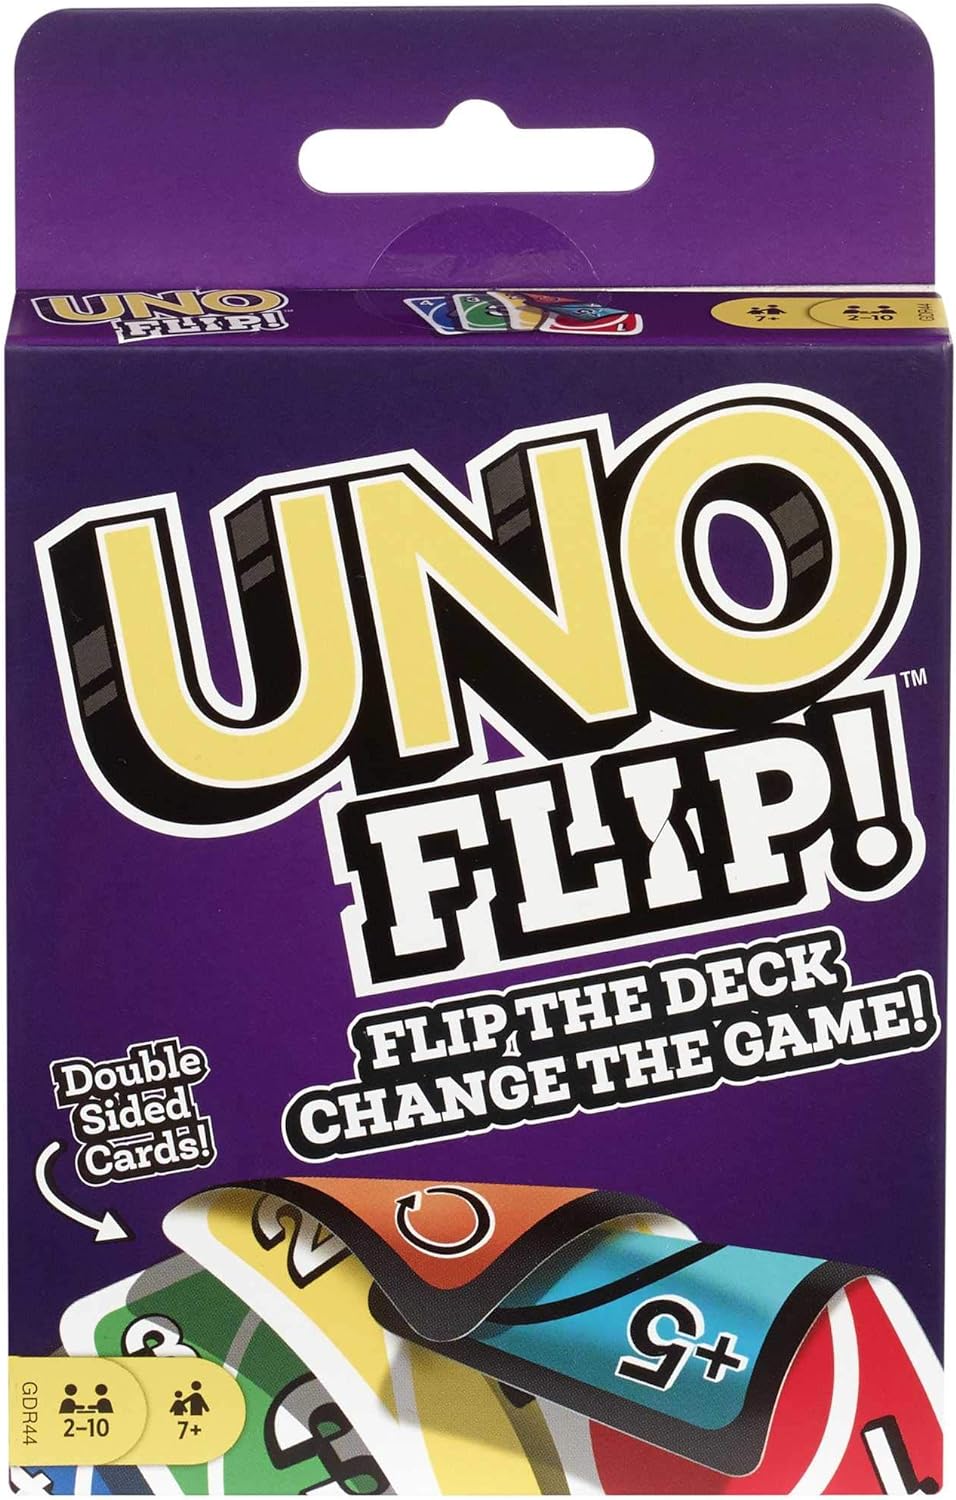 Mattel Games UNO FLIP! Family Card Game for Adults, Teens & Kids, Double-sided Deck with Special Flip Card